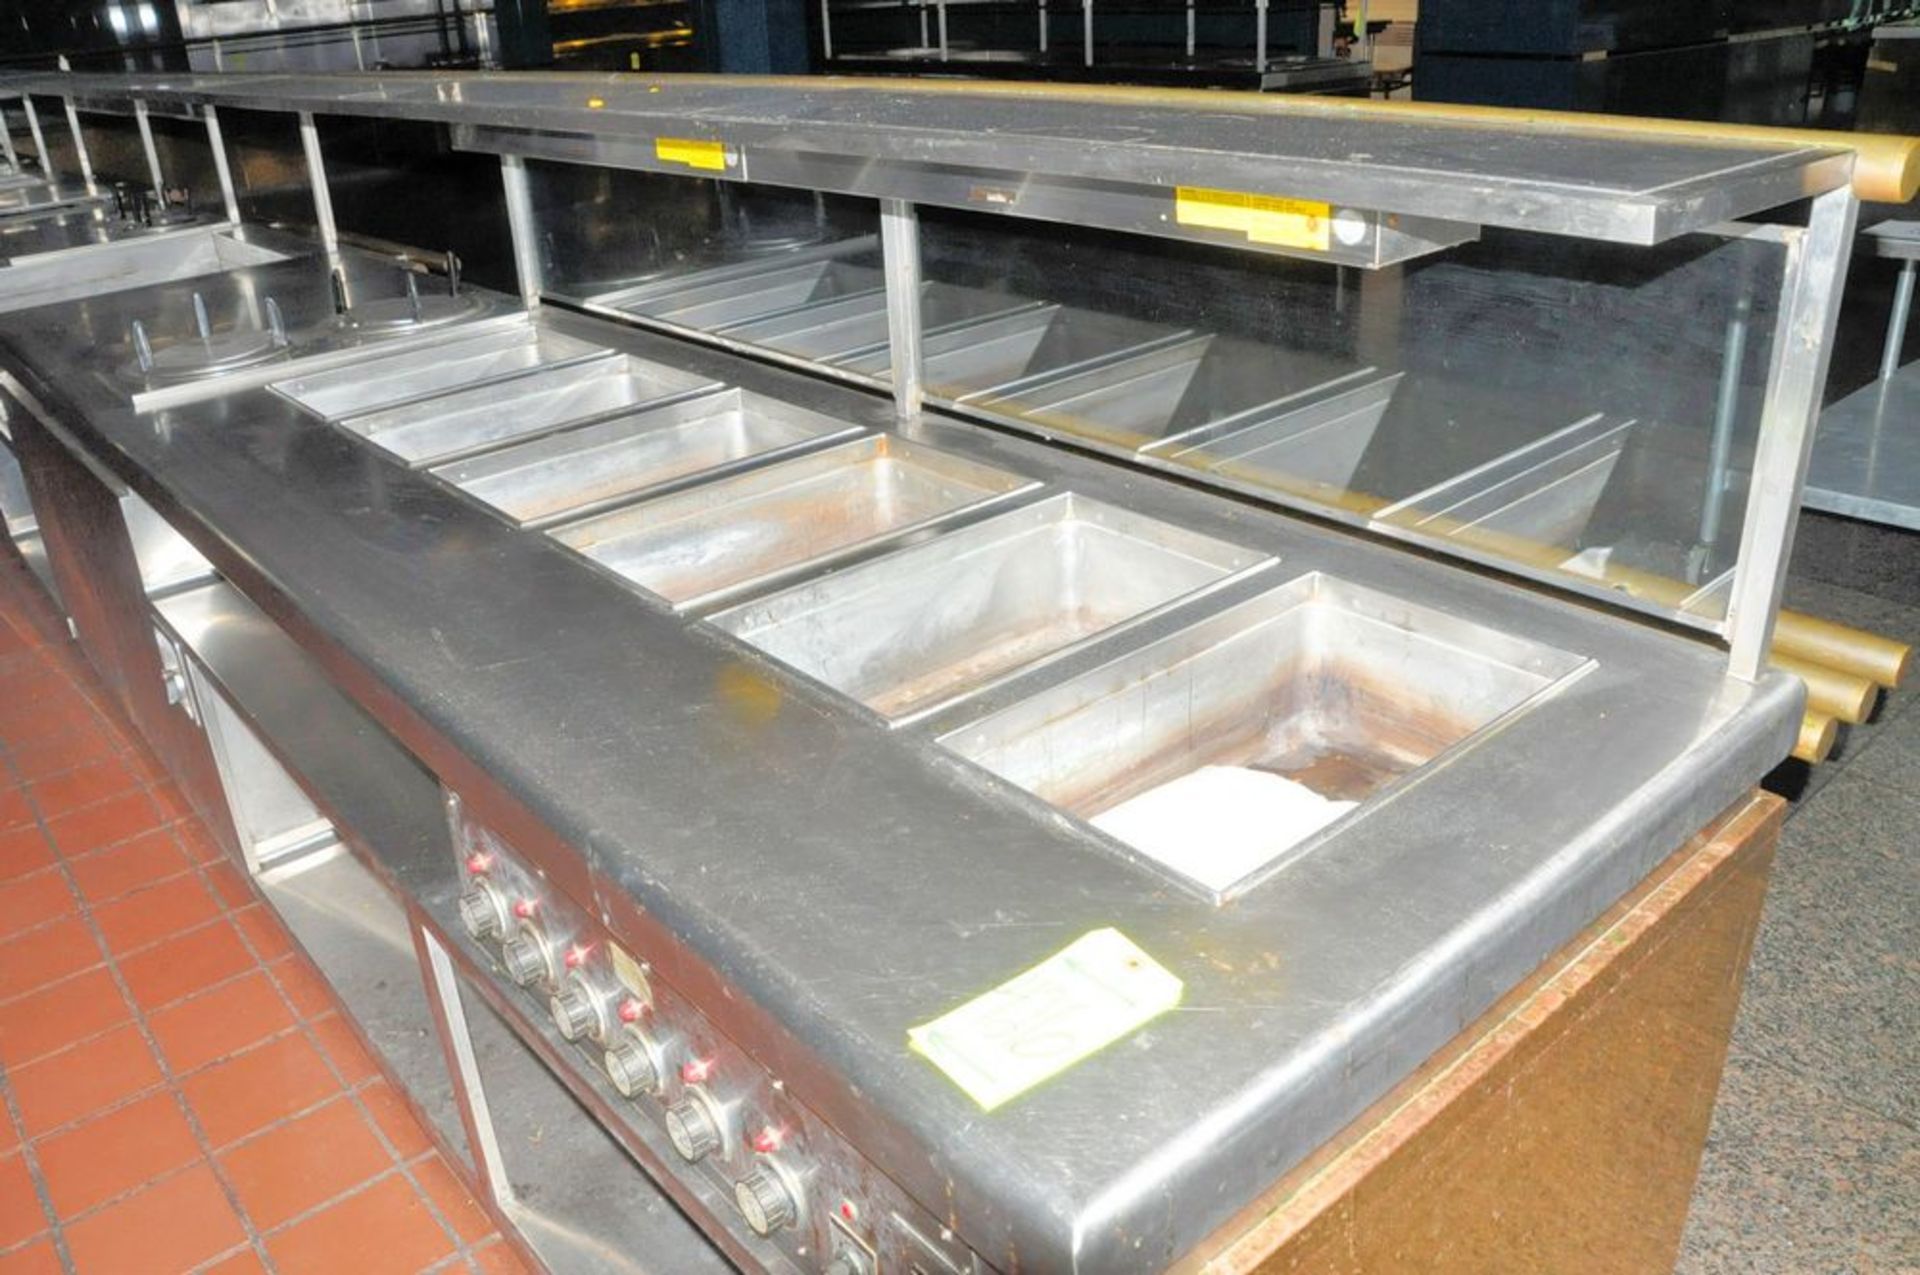 Hobart Stainless Steel Hot Foods Server System, 3' x 39' 6", (1) Unit Has 3-Compartments and (2) - Image 5 of 13